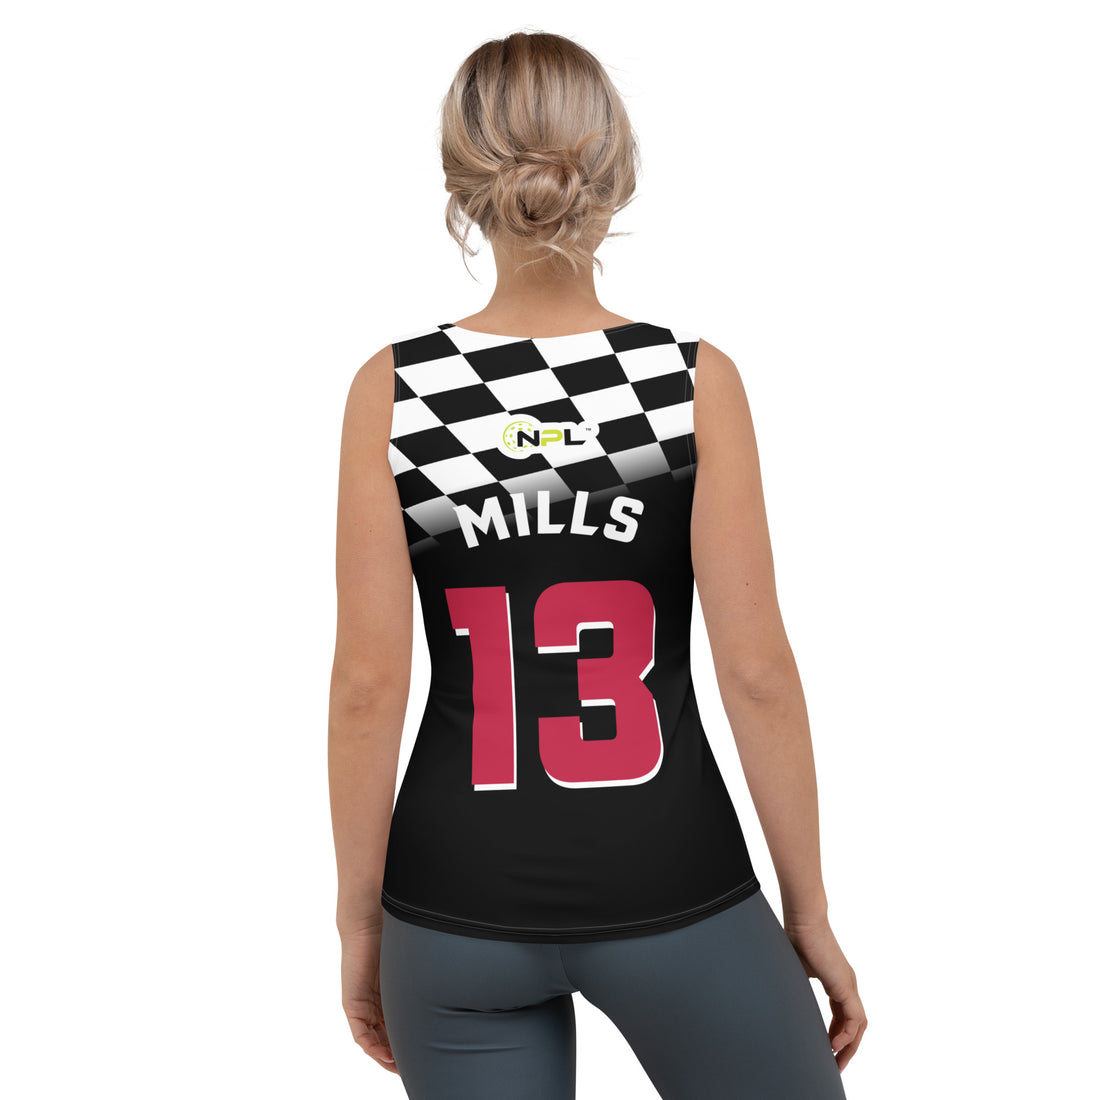 Mills 13, AKA Chris Miller, Indy Drivers™ SKYblue™ 2023 Authentic Sleeveless Jersey - Black